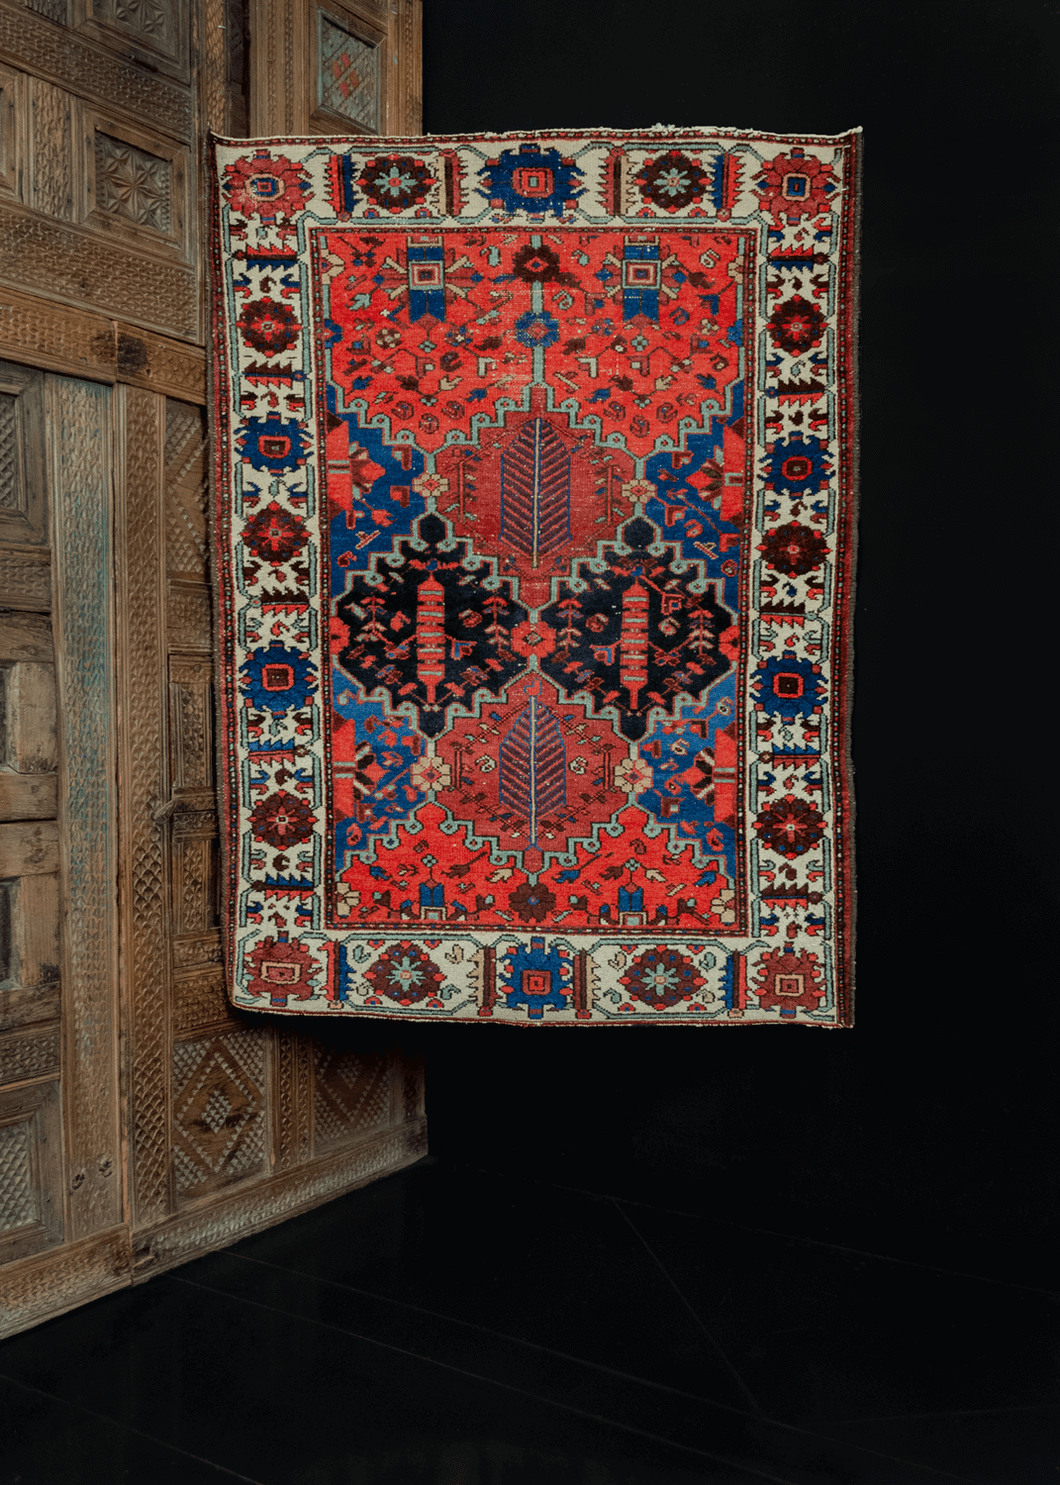 Bakhtiari Rug handwoven in Southern Iran during second quarter of 20th century. Garden design with interlocking polygons. Bold blues and reds paired with soft ivories and browns. 